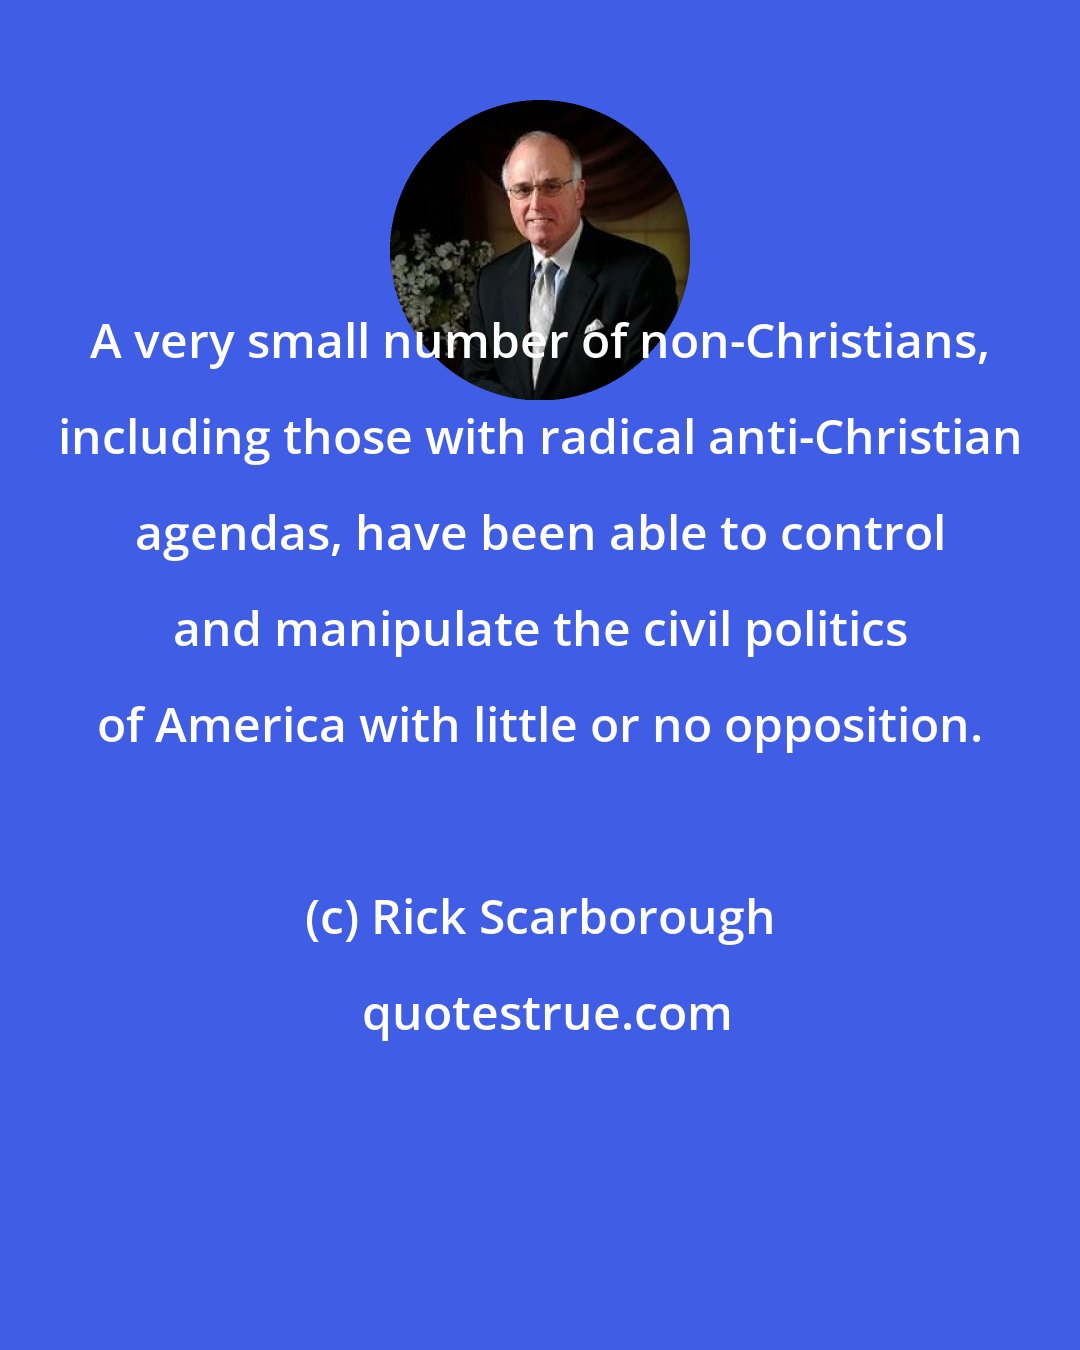 Rick Scarborough: A very small number of non-Christians, including those with radical anti-Christian agendas, have been able to control and manipulate the civil politics of America with little or no opposition.